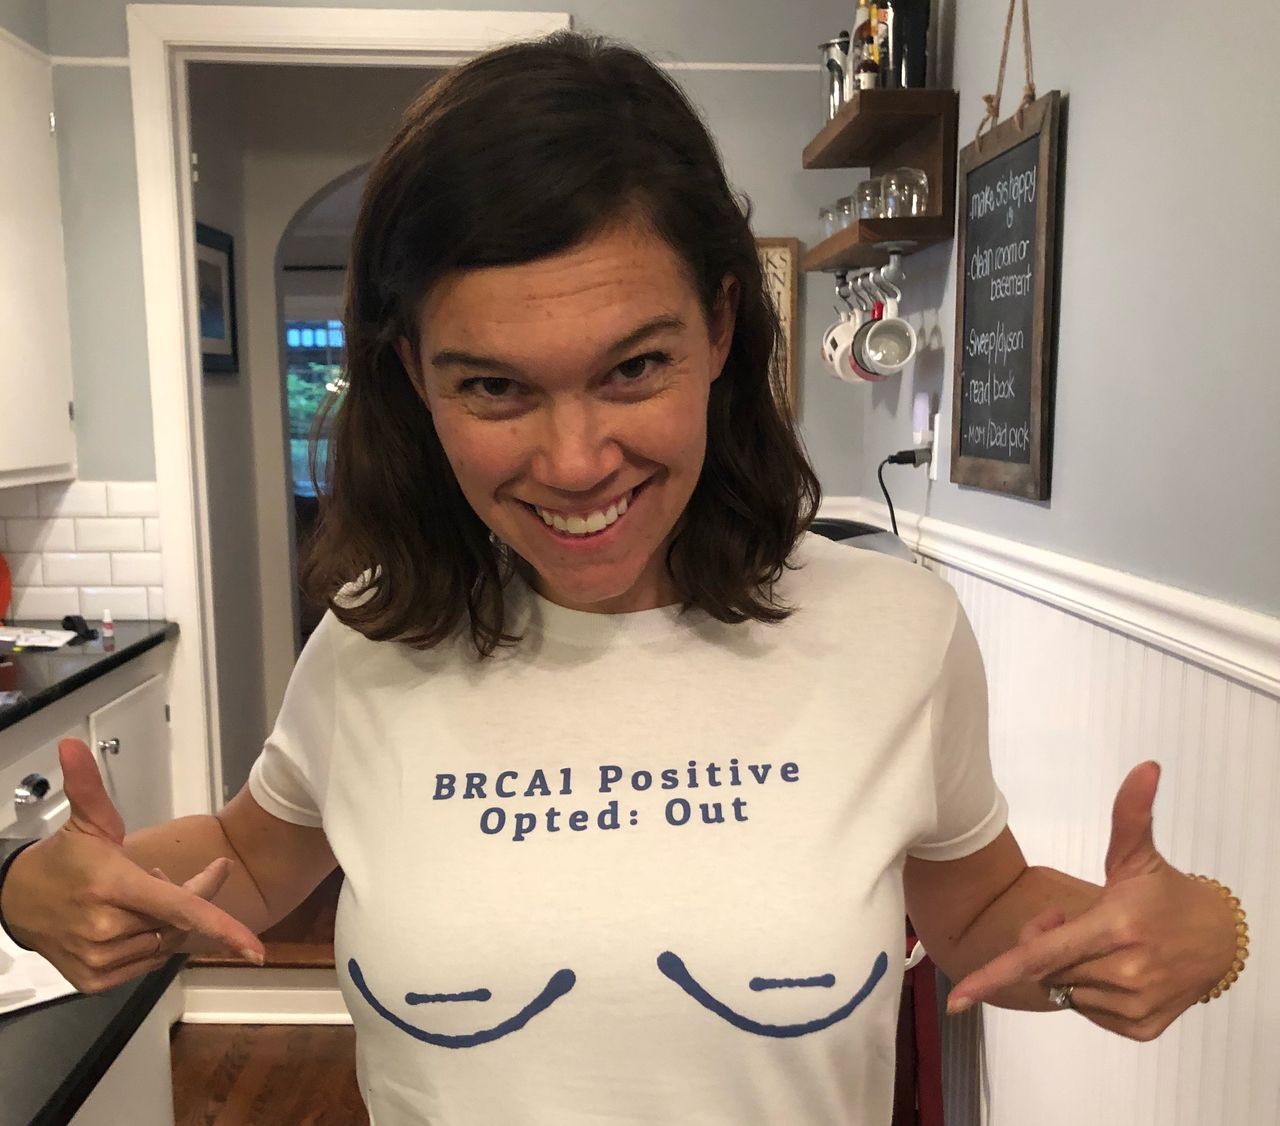 Maureen Boesen, one month prior to receiving her new genetic results, showing she's proud to be BRCA-positive and a previvor.